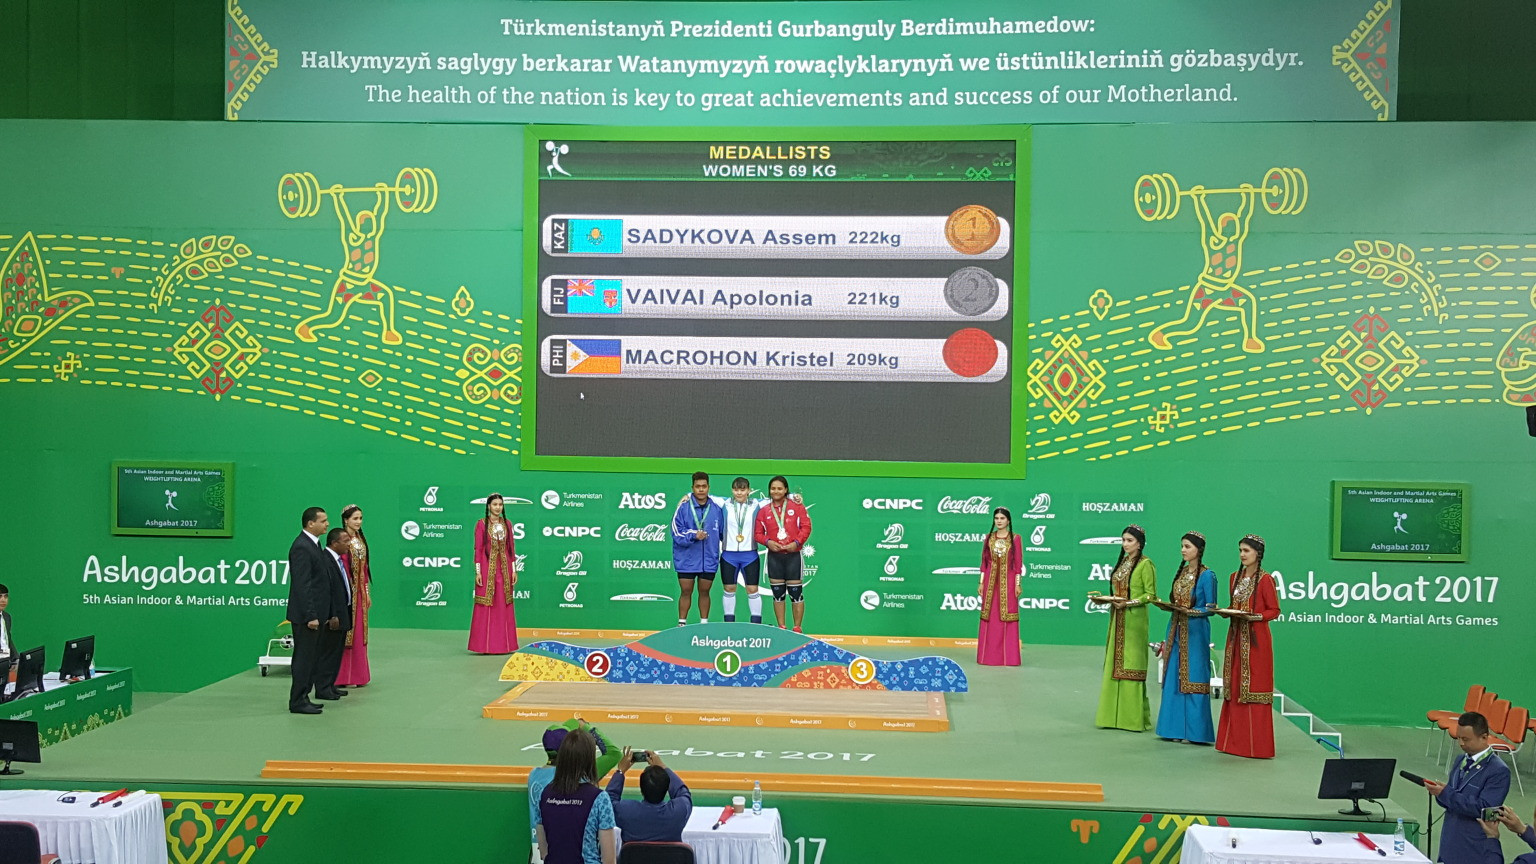 Athletes from 19 Oceania countries, including Fiji, competed at the 2017 Asian Indoor and Martial Arts Games in Ashgabat in Turkmenistan - an invitation now set to be extended to Hangzhou 2022 ©Ashgabat 2017